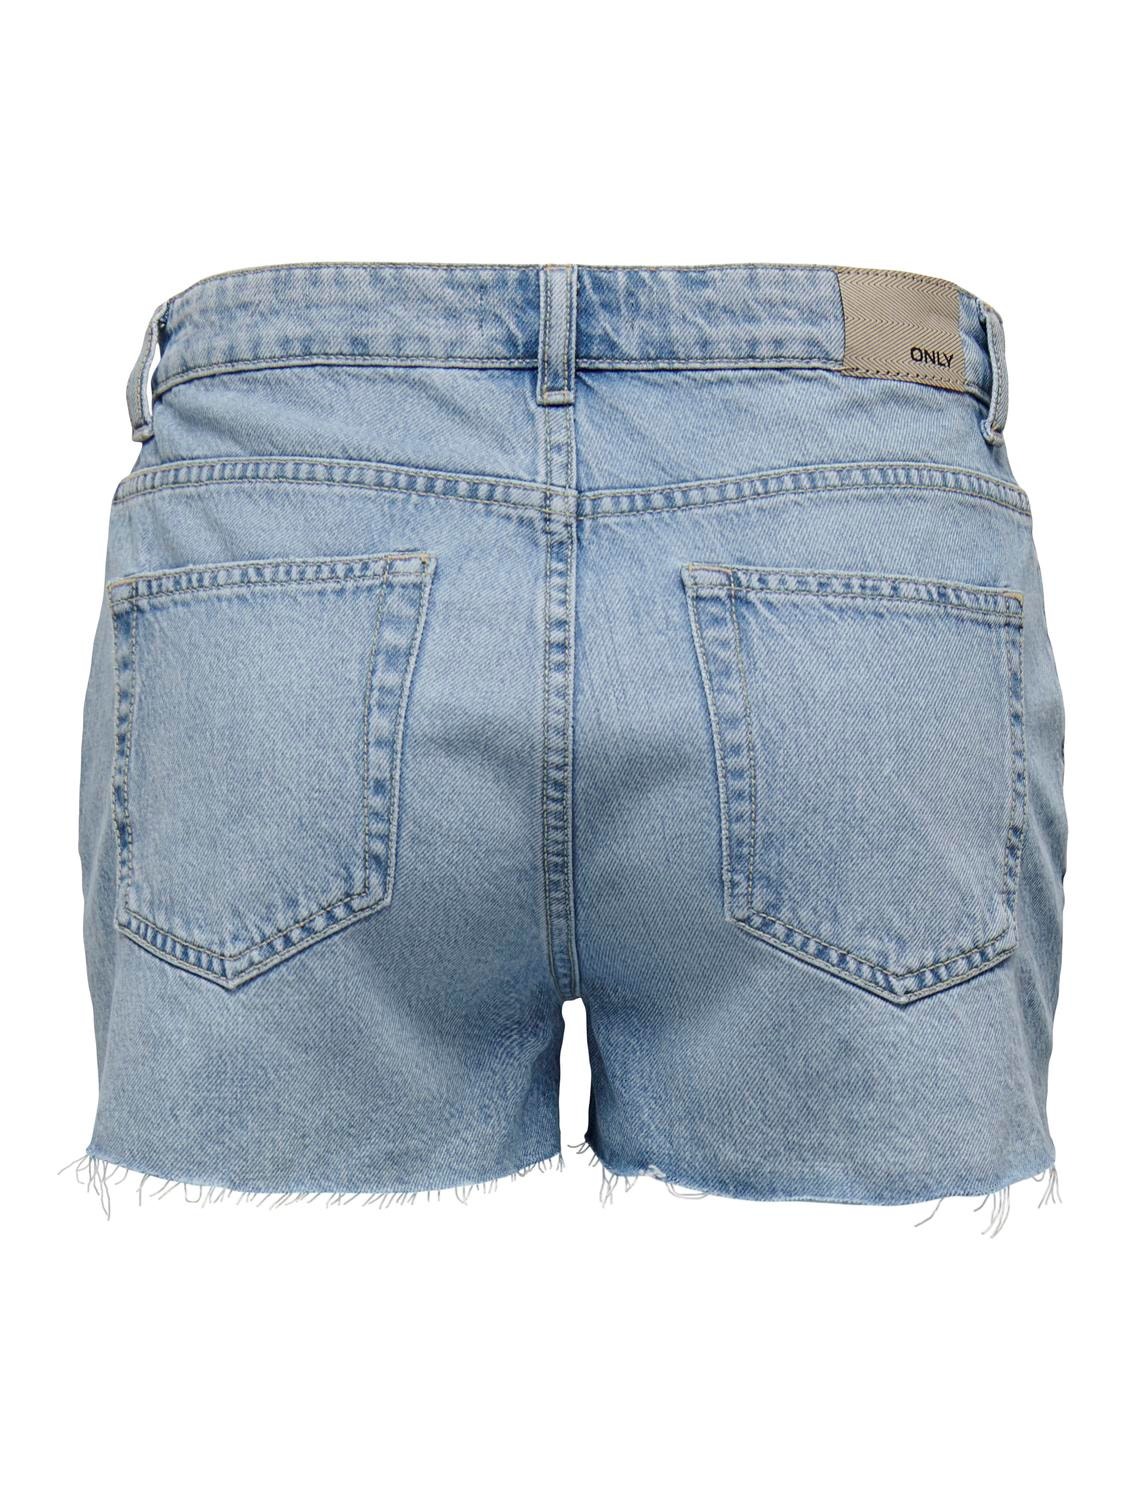 ONLY Shorts Loose Fit Taille moyenne -Light Medium Blue Denim - 15314420